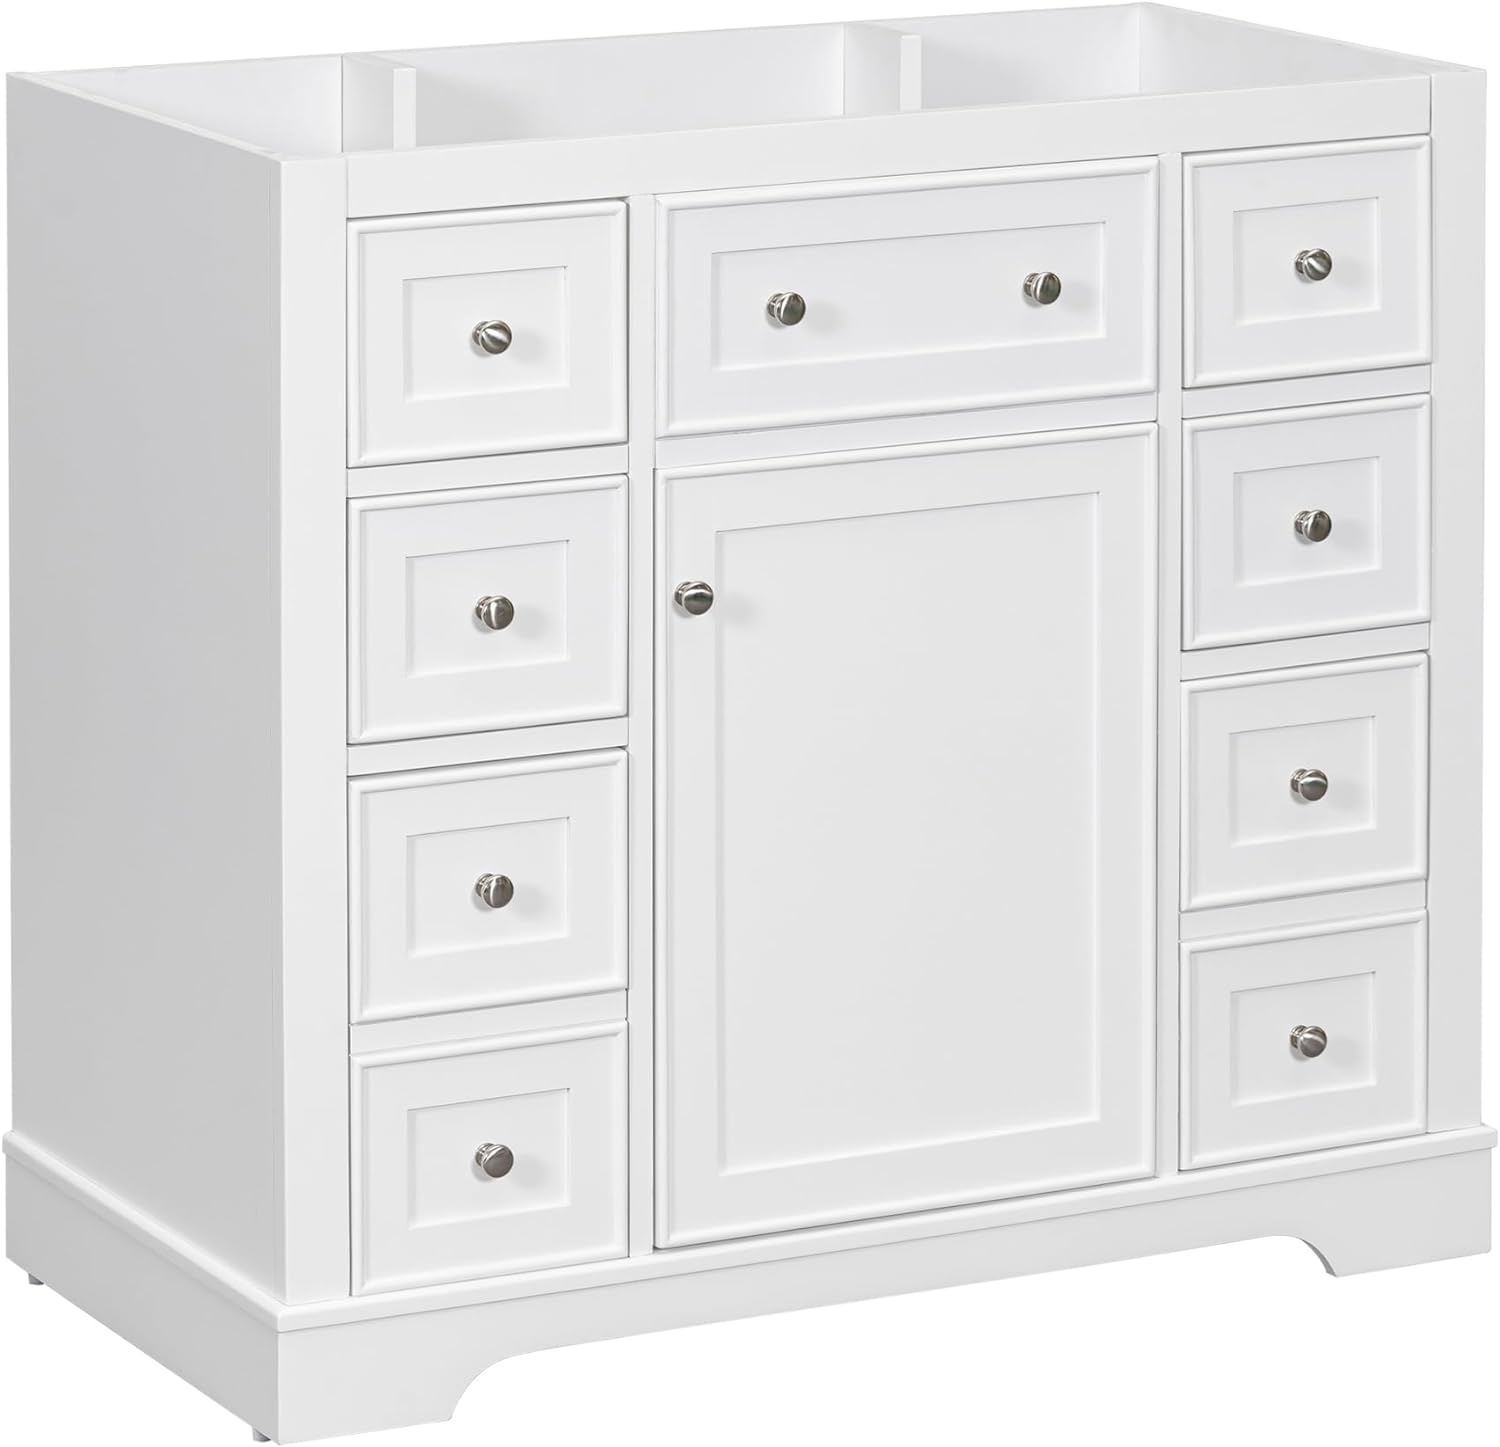 36 Bathroom Vanity Without Sink, Cabinet Base Only, Bathroom Cabinet with 6 Multi-Functional Drawers and 1 Door, Solid Wood Frame Bathroom Cabinet, White